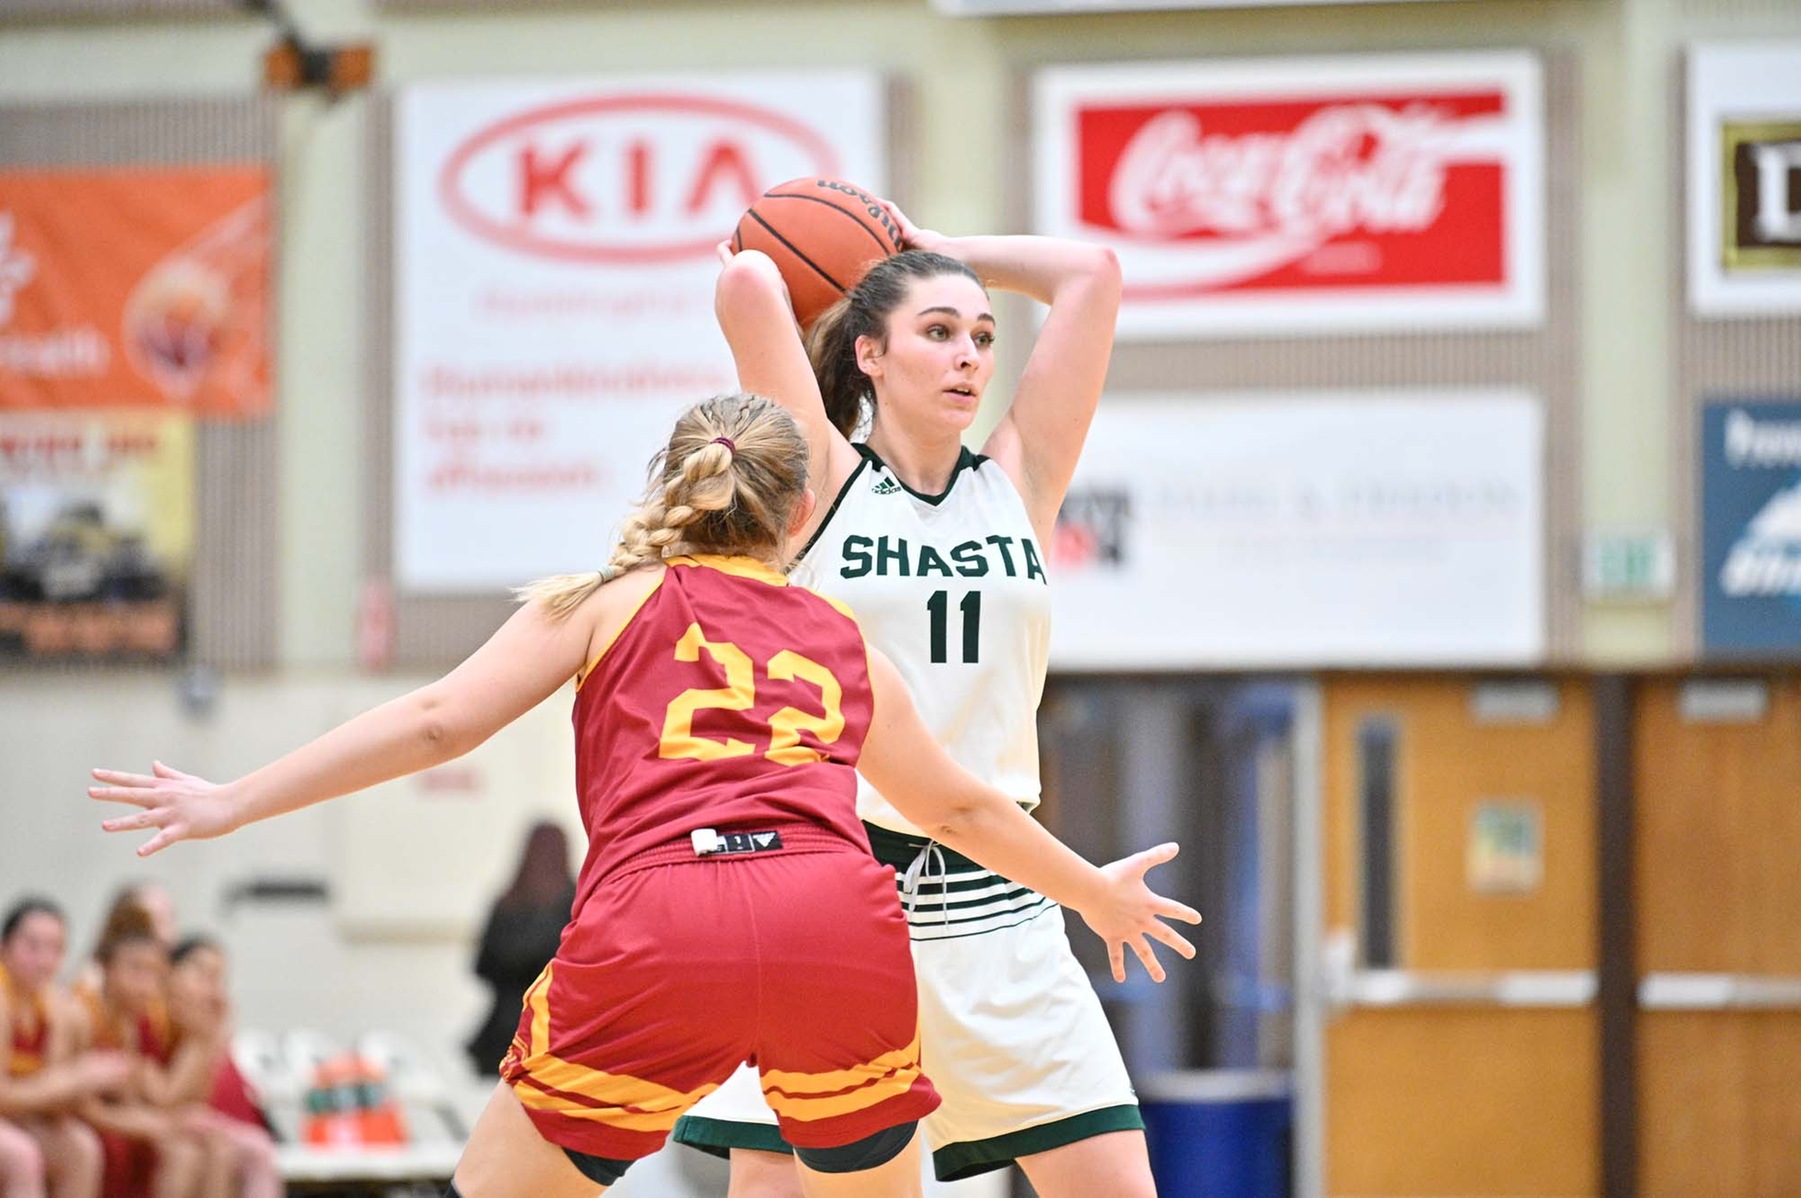 WALLACE SCORES 32 IN SHASTA'S 91-71 LOSS TO REDWOODS